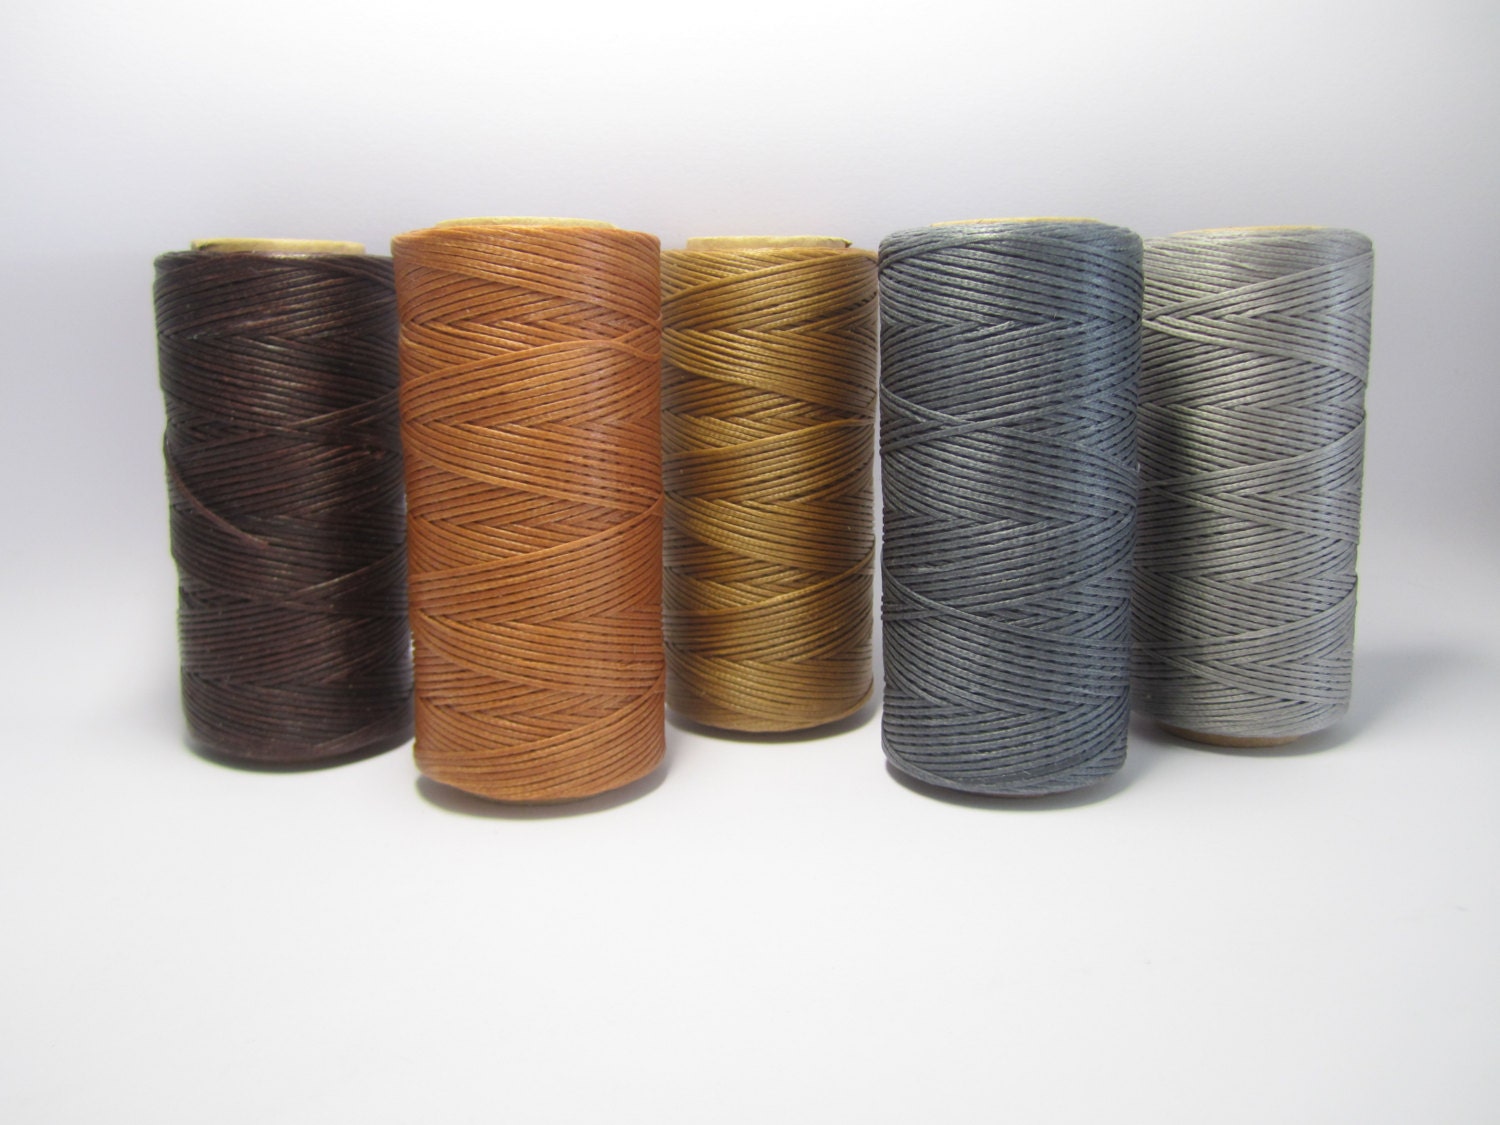 Buy 10 Yds. Waxed Cotton Cord for Jewelry Making, Sewing Leather Goods,  Waxed Cord in a Choice of 6 Earthy Shades, TEN YARDS Online in India 